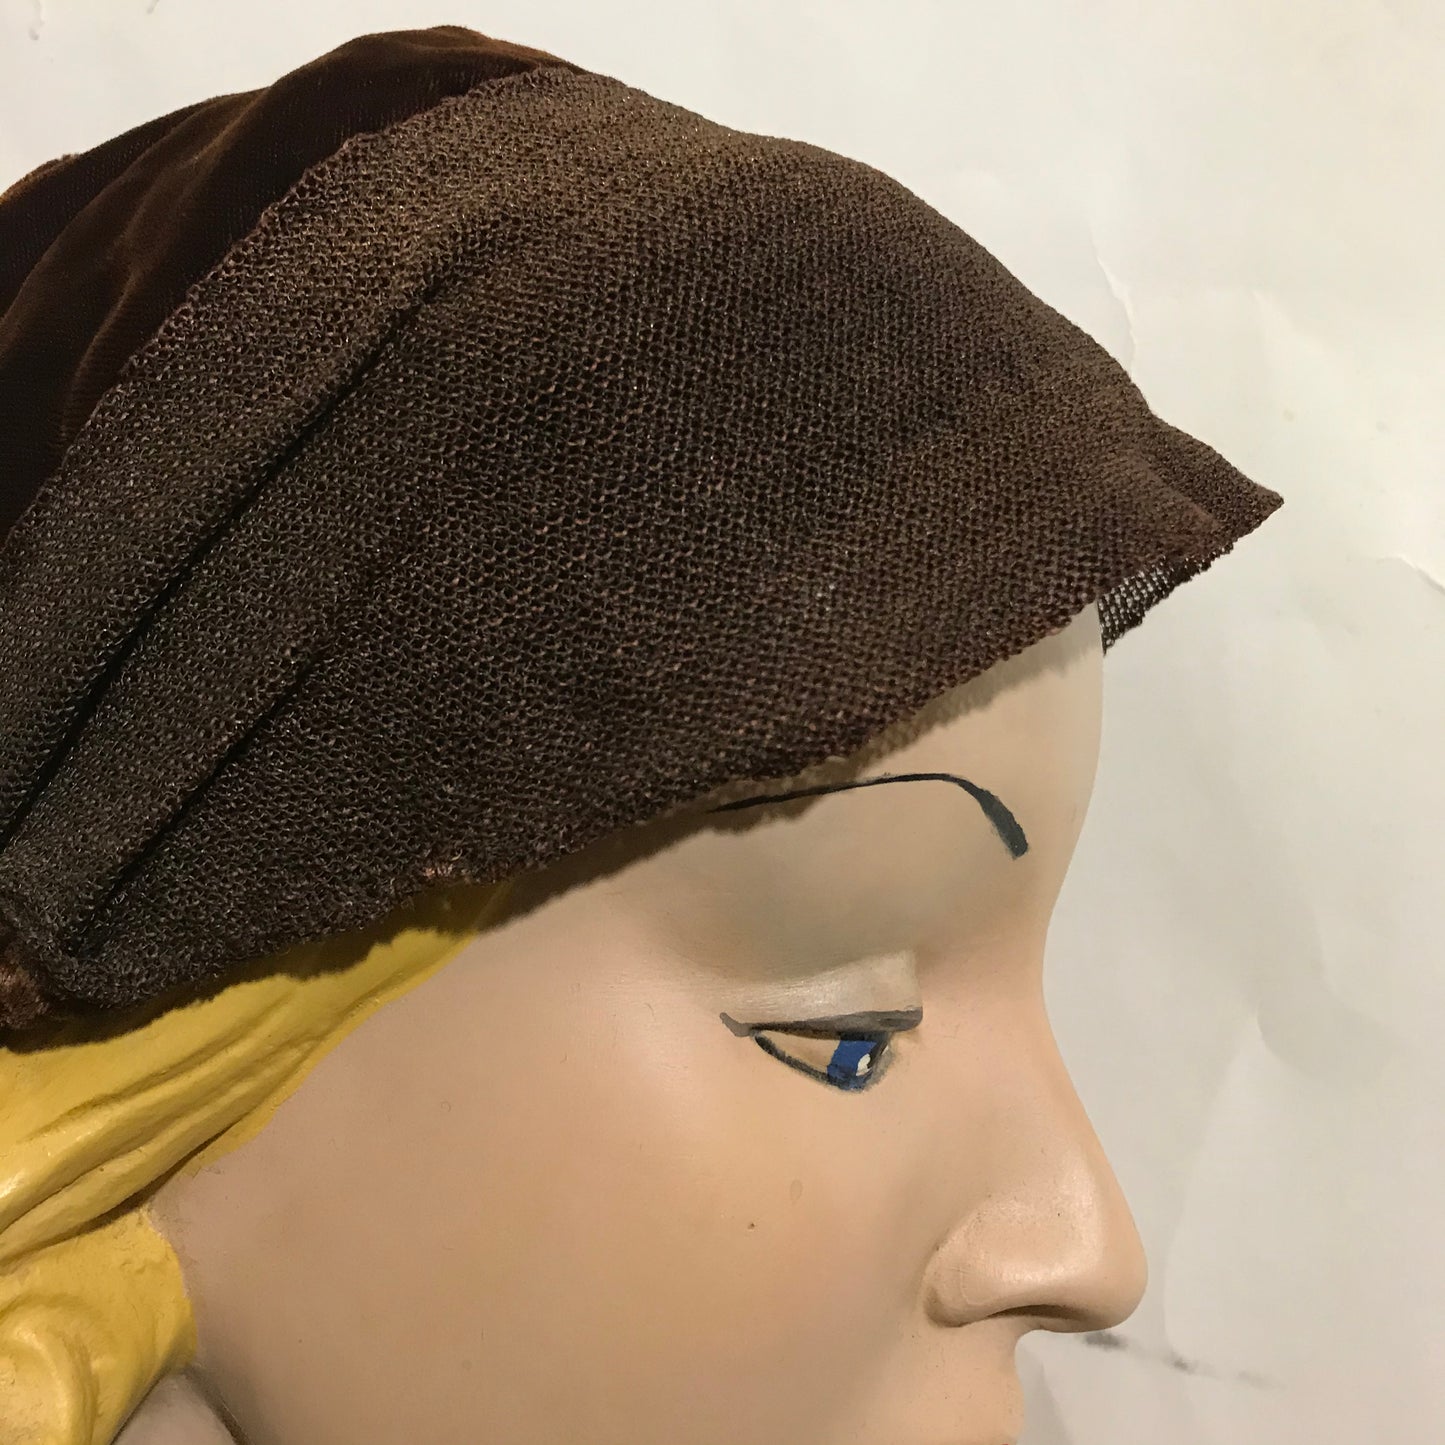 Bronze and Copper Velvet Cloche Hat with Feathers circa 1920s